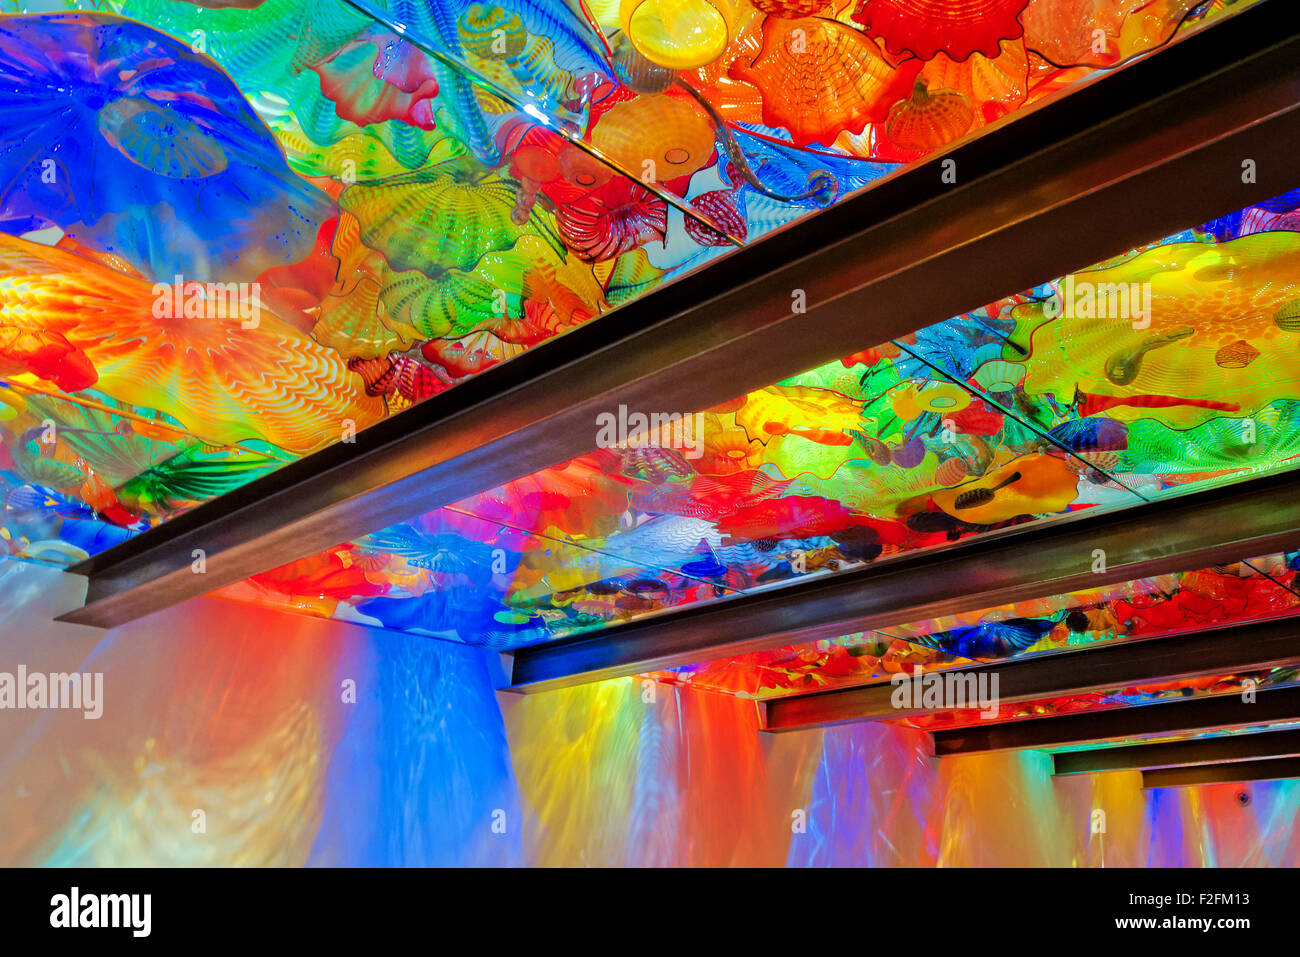 Chihuly Glass Ceiling Stock Photos Chihuly Glass Ceiling